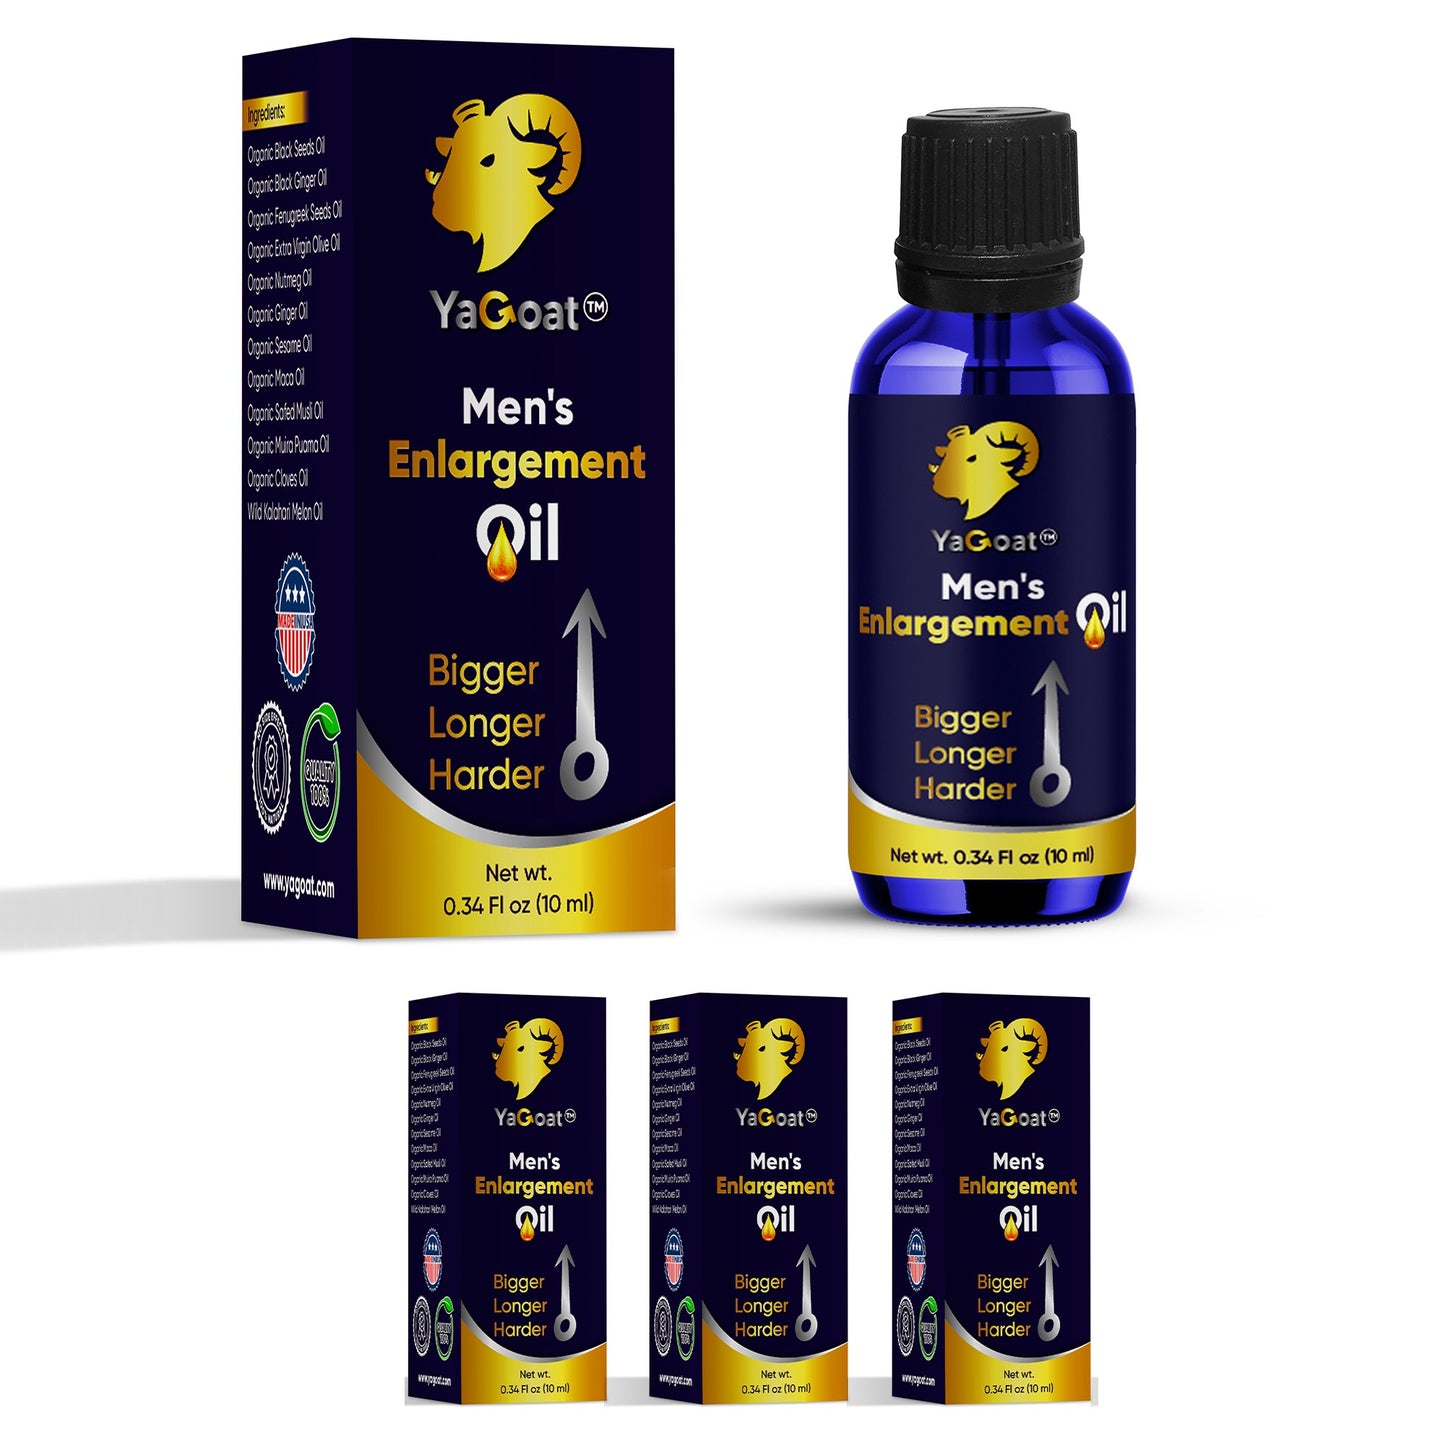  male enlargement cream, men's enlargement oil , Enlarge penis, how to grow your dick bigger, how to get big penis and the real way to increase size